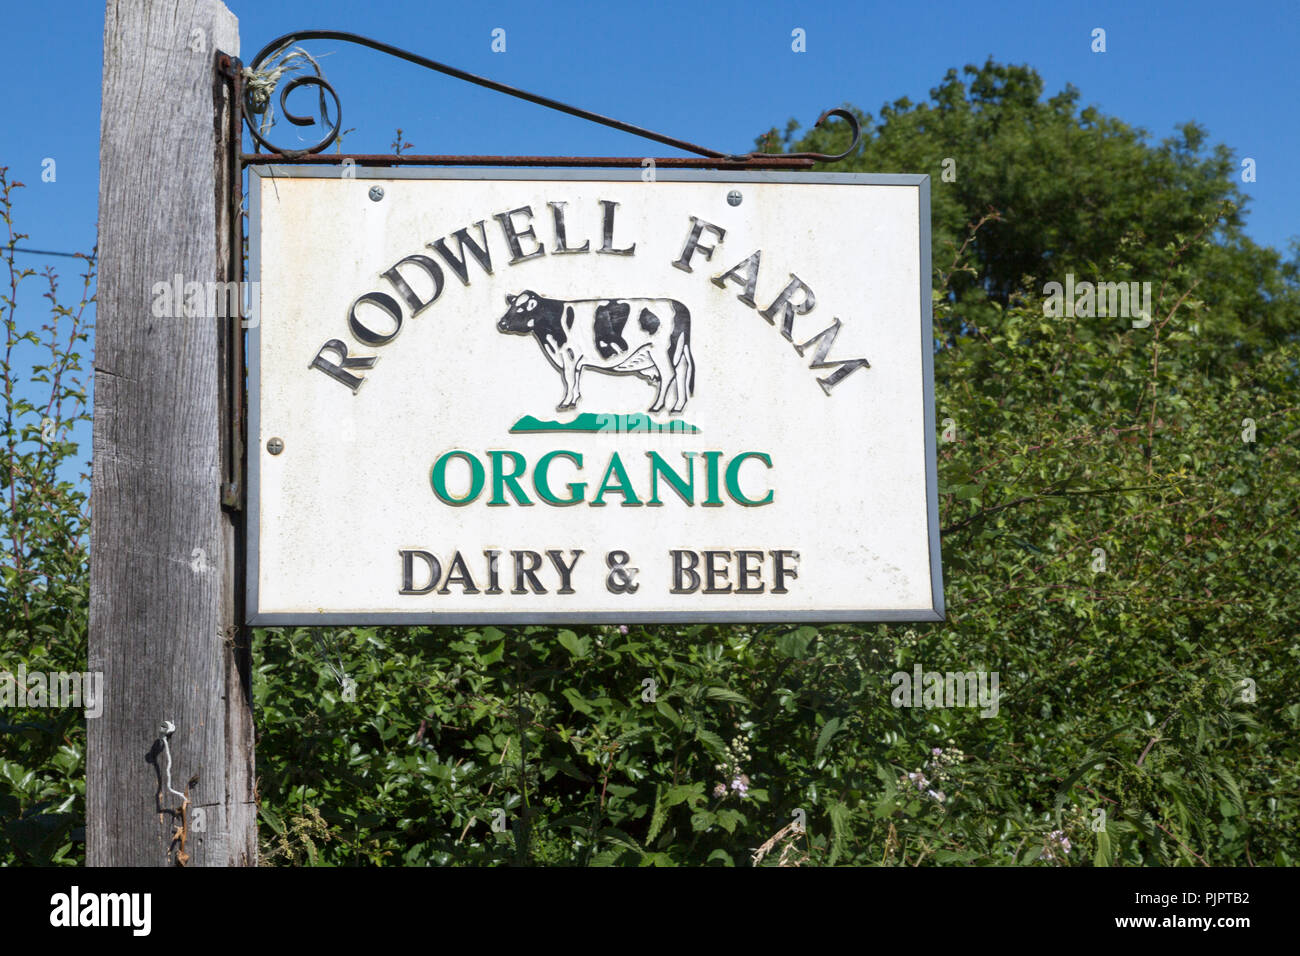 Sign at Rodwell Farm, organic dairy and beef farm, Compton Bassett, near Calne, Wiltshire, England, UK Stock Photo